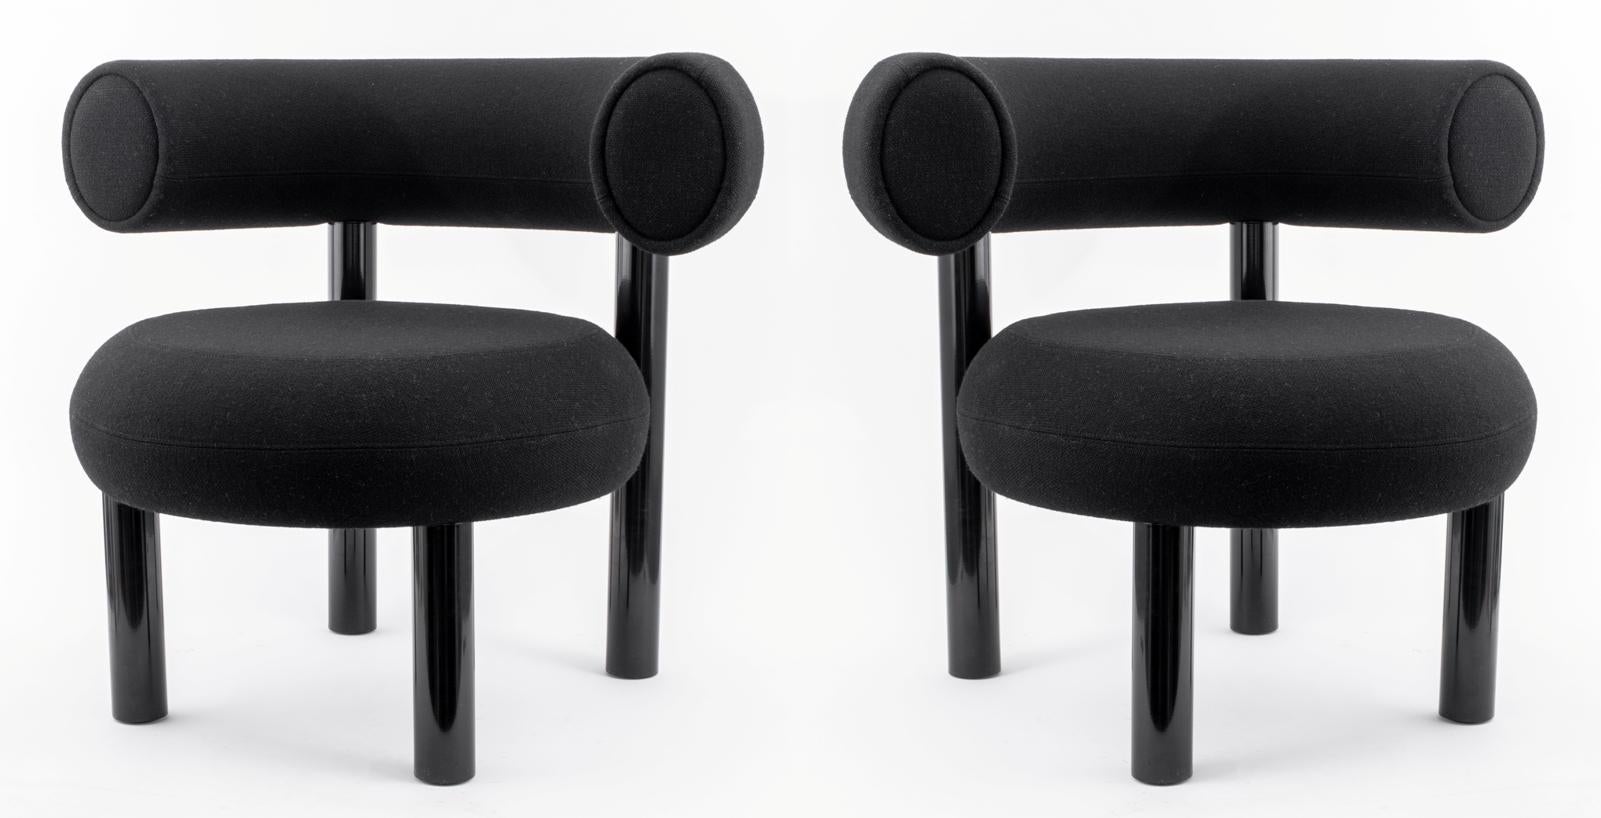 Pair of Tom Dixon (British, b. 1959) Fat lounge chairs, of molded foam upholstered in black wool upon four black lacquered metal legs, 